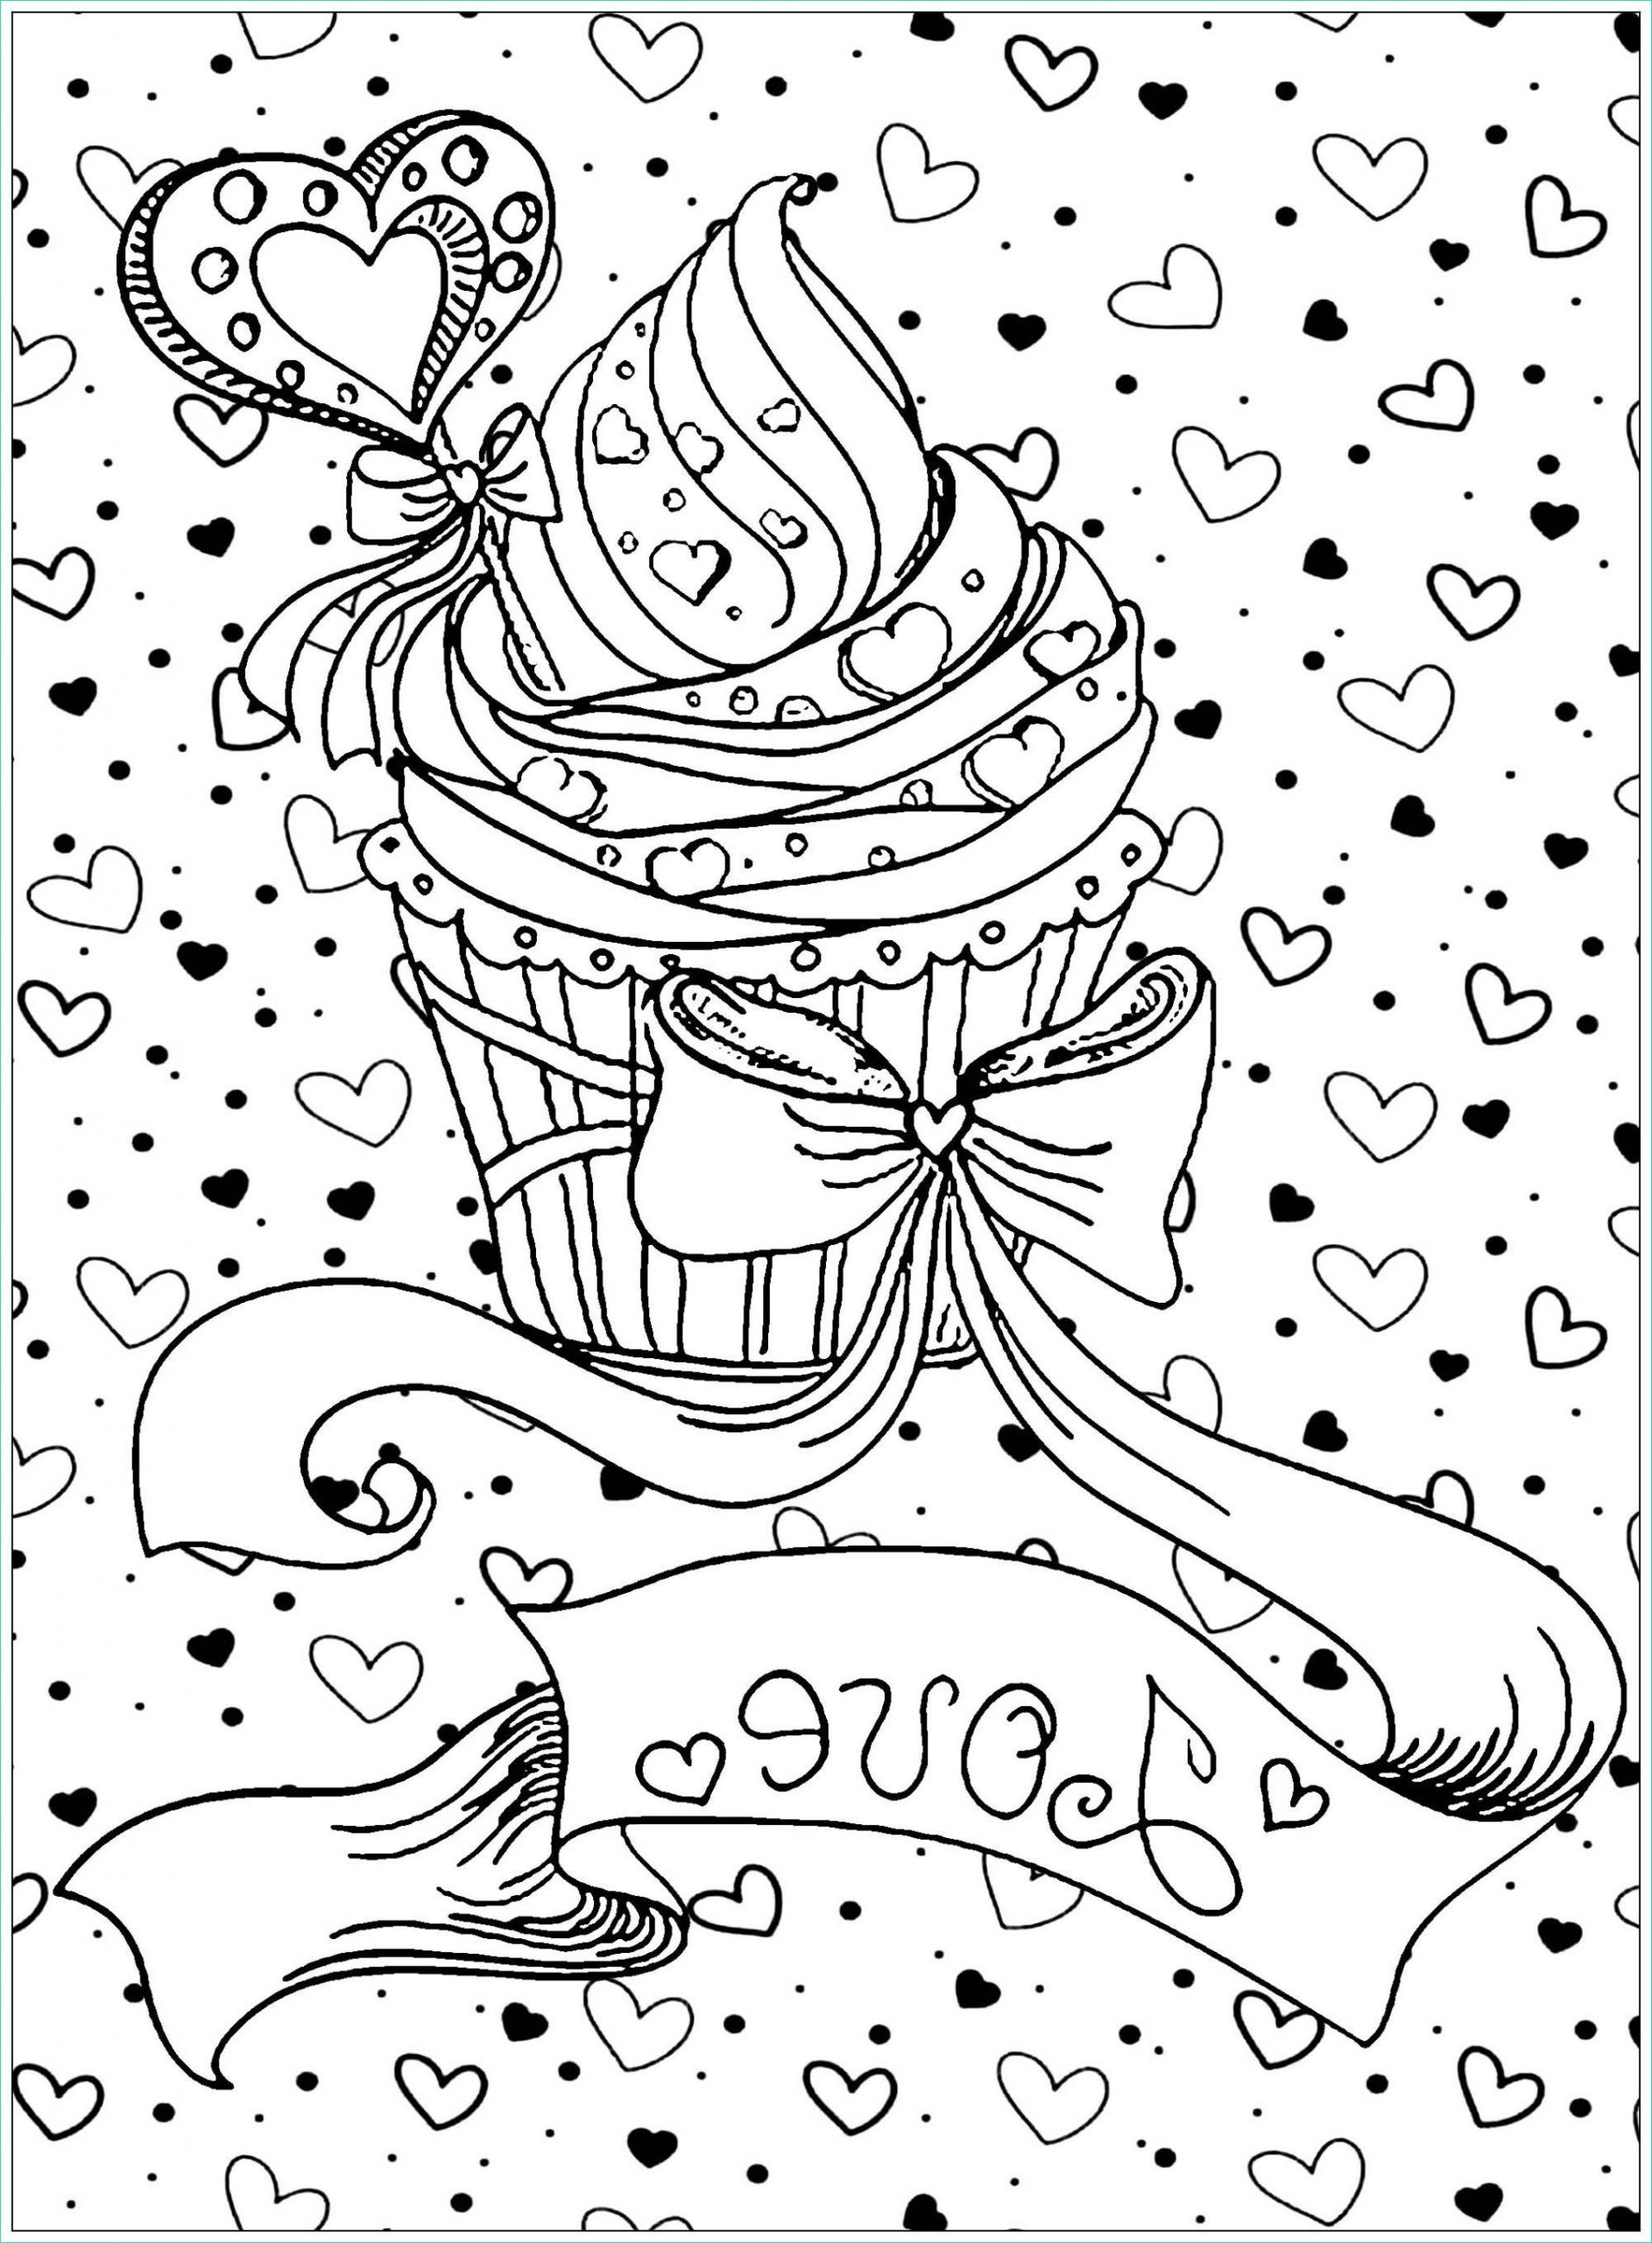 image=cup cakes coloring page cupcake love 1